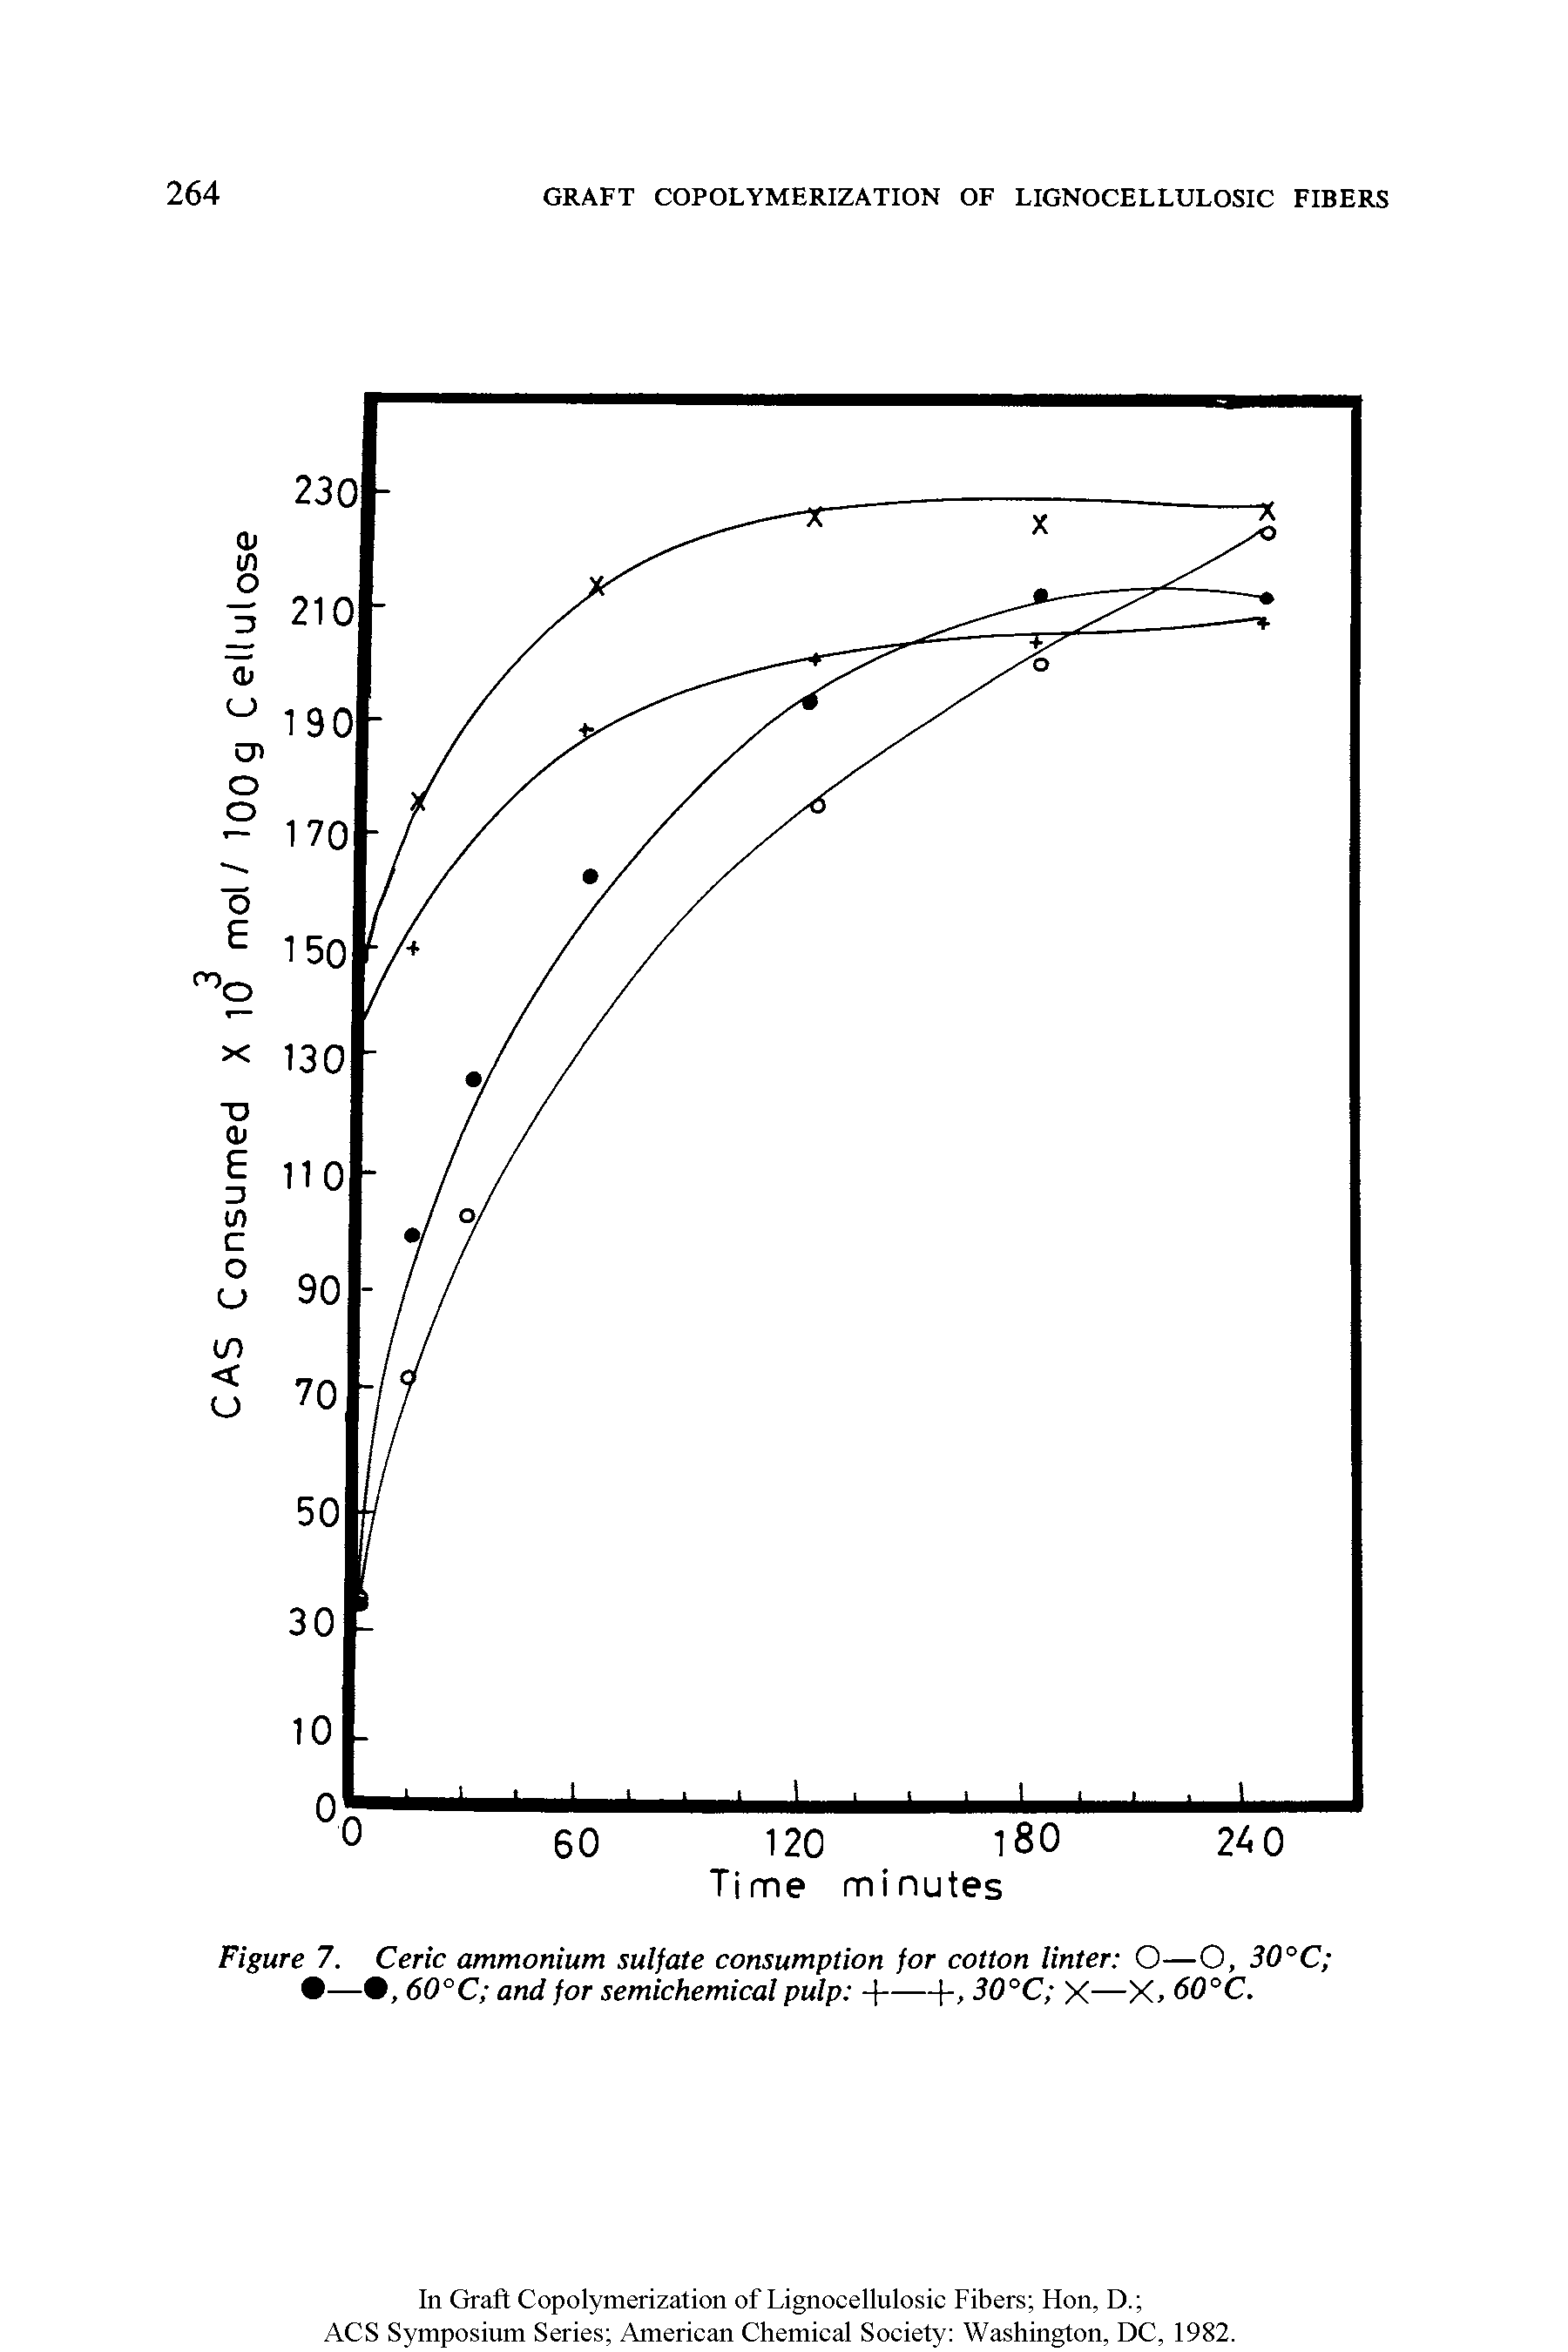 Figure 7. Ceric ammonium sulfate consumption for cotton linter O—O, 30°C — , 60°C and for semichemical pulp - ---------30°C X—X 60°C.